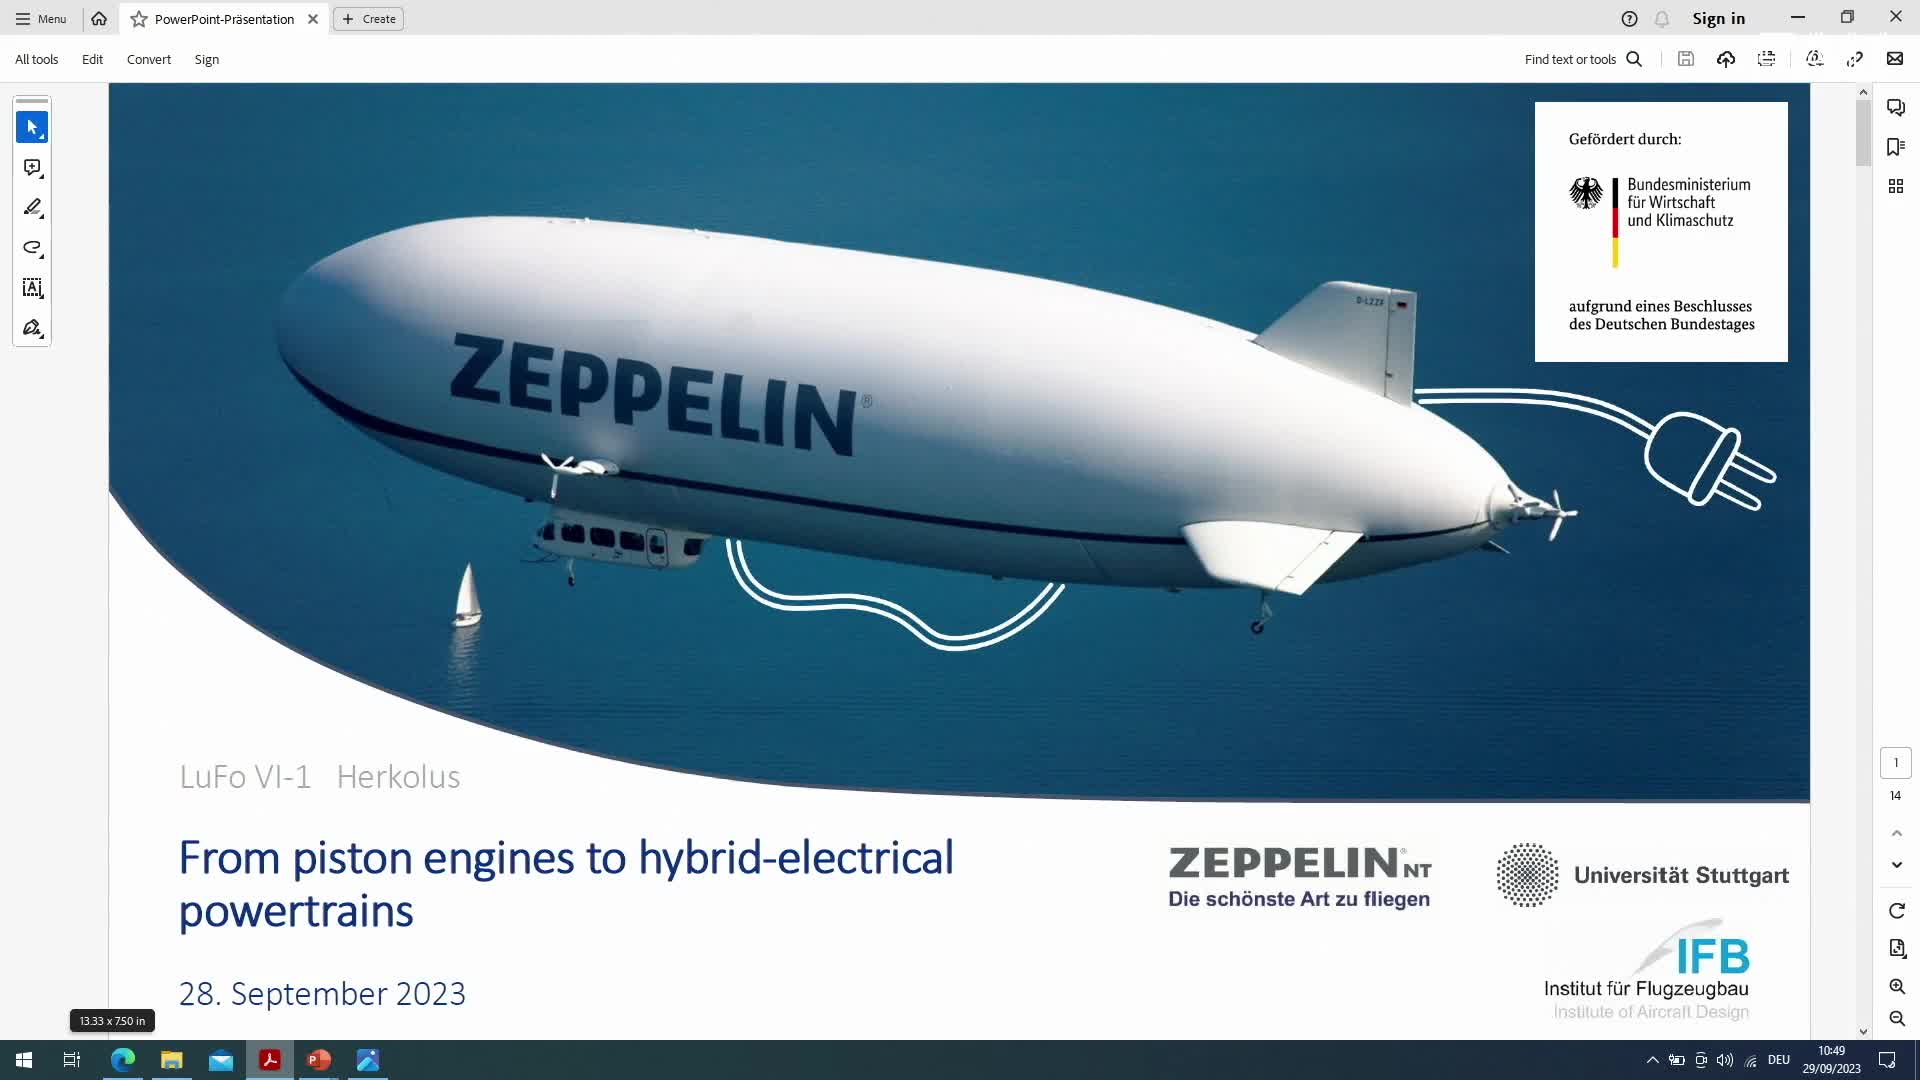 From piston engines to hybrid electrical drivetrains: a feasibility study to evaluate re-engining options for the Zeppelin NT airship preview image